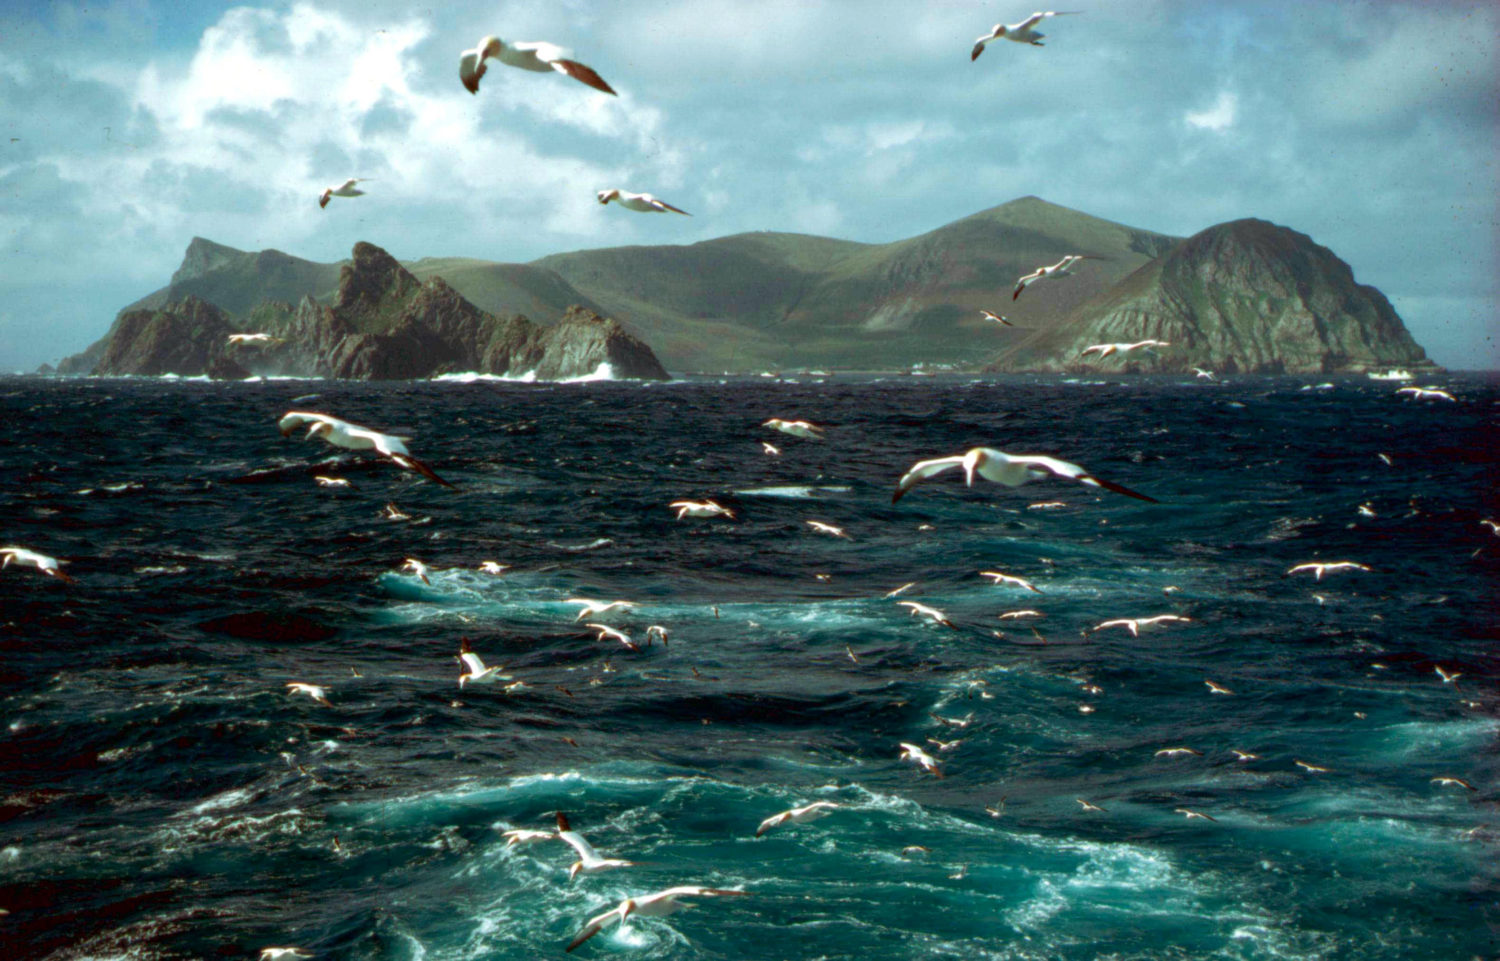 Staff wanted to work on remote island of St Kilda